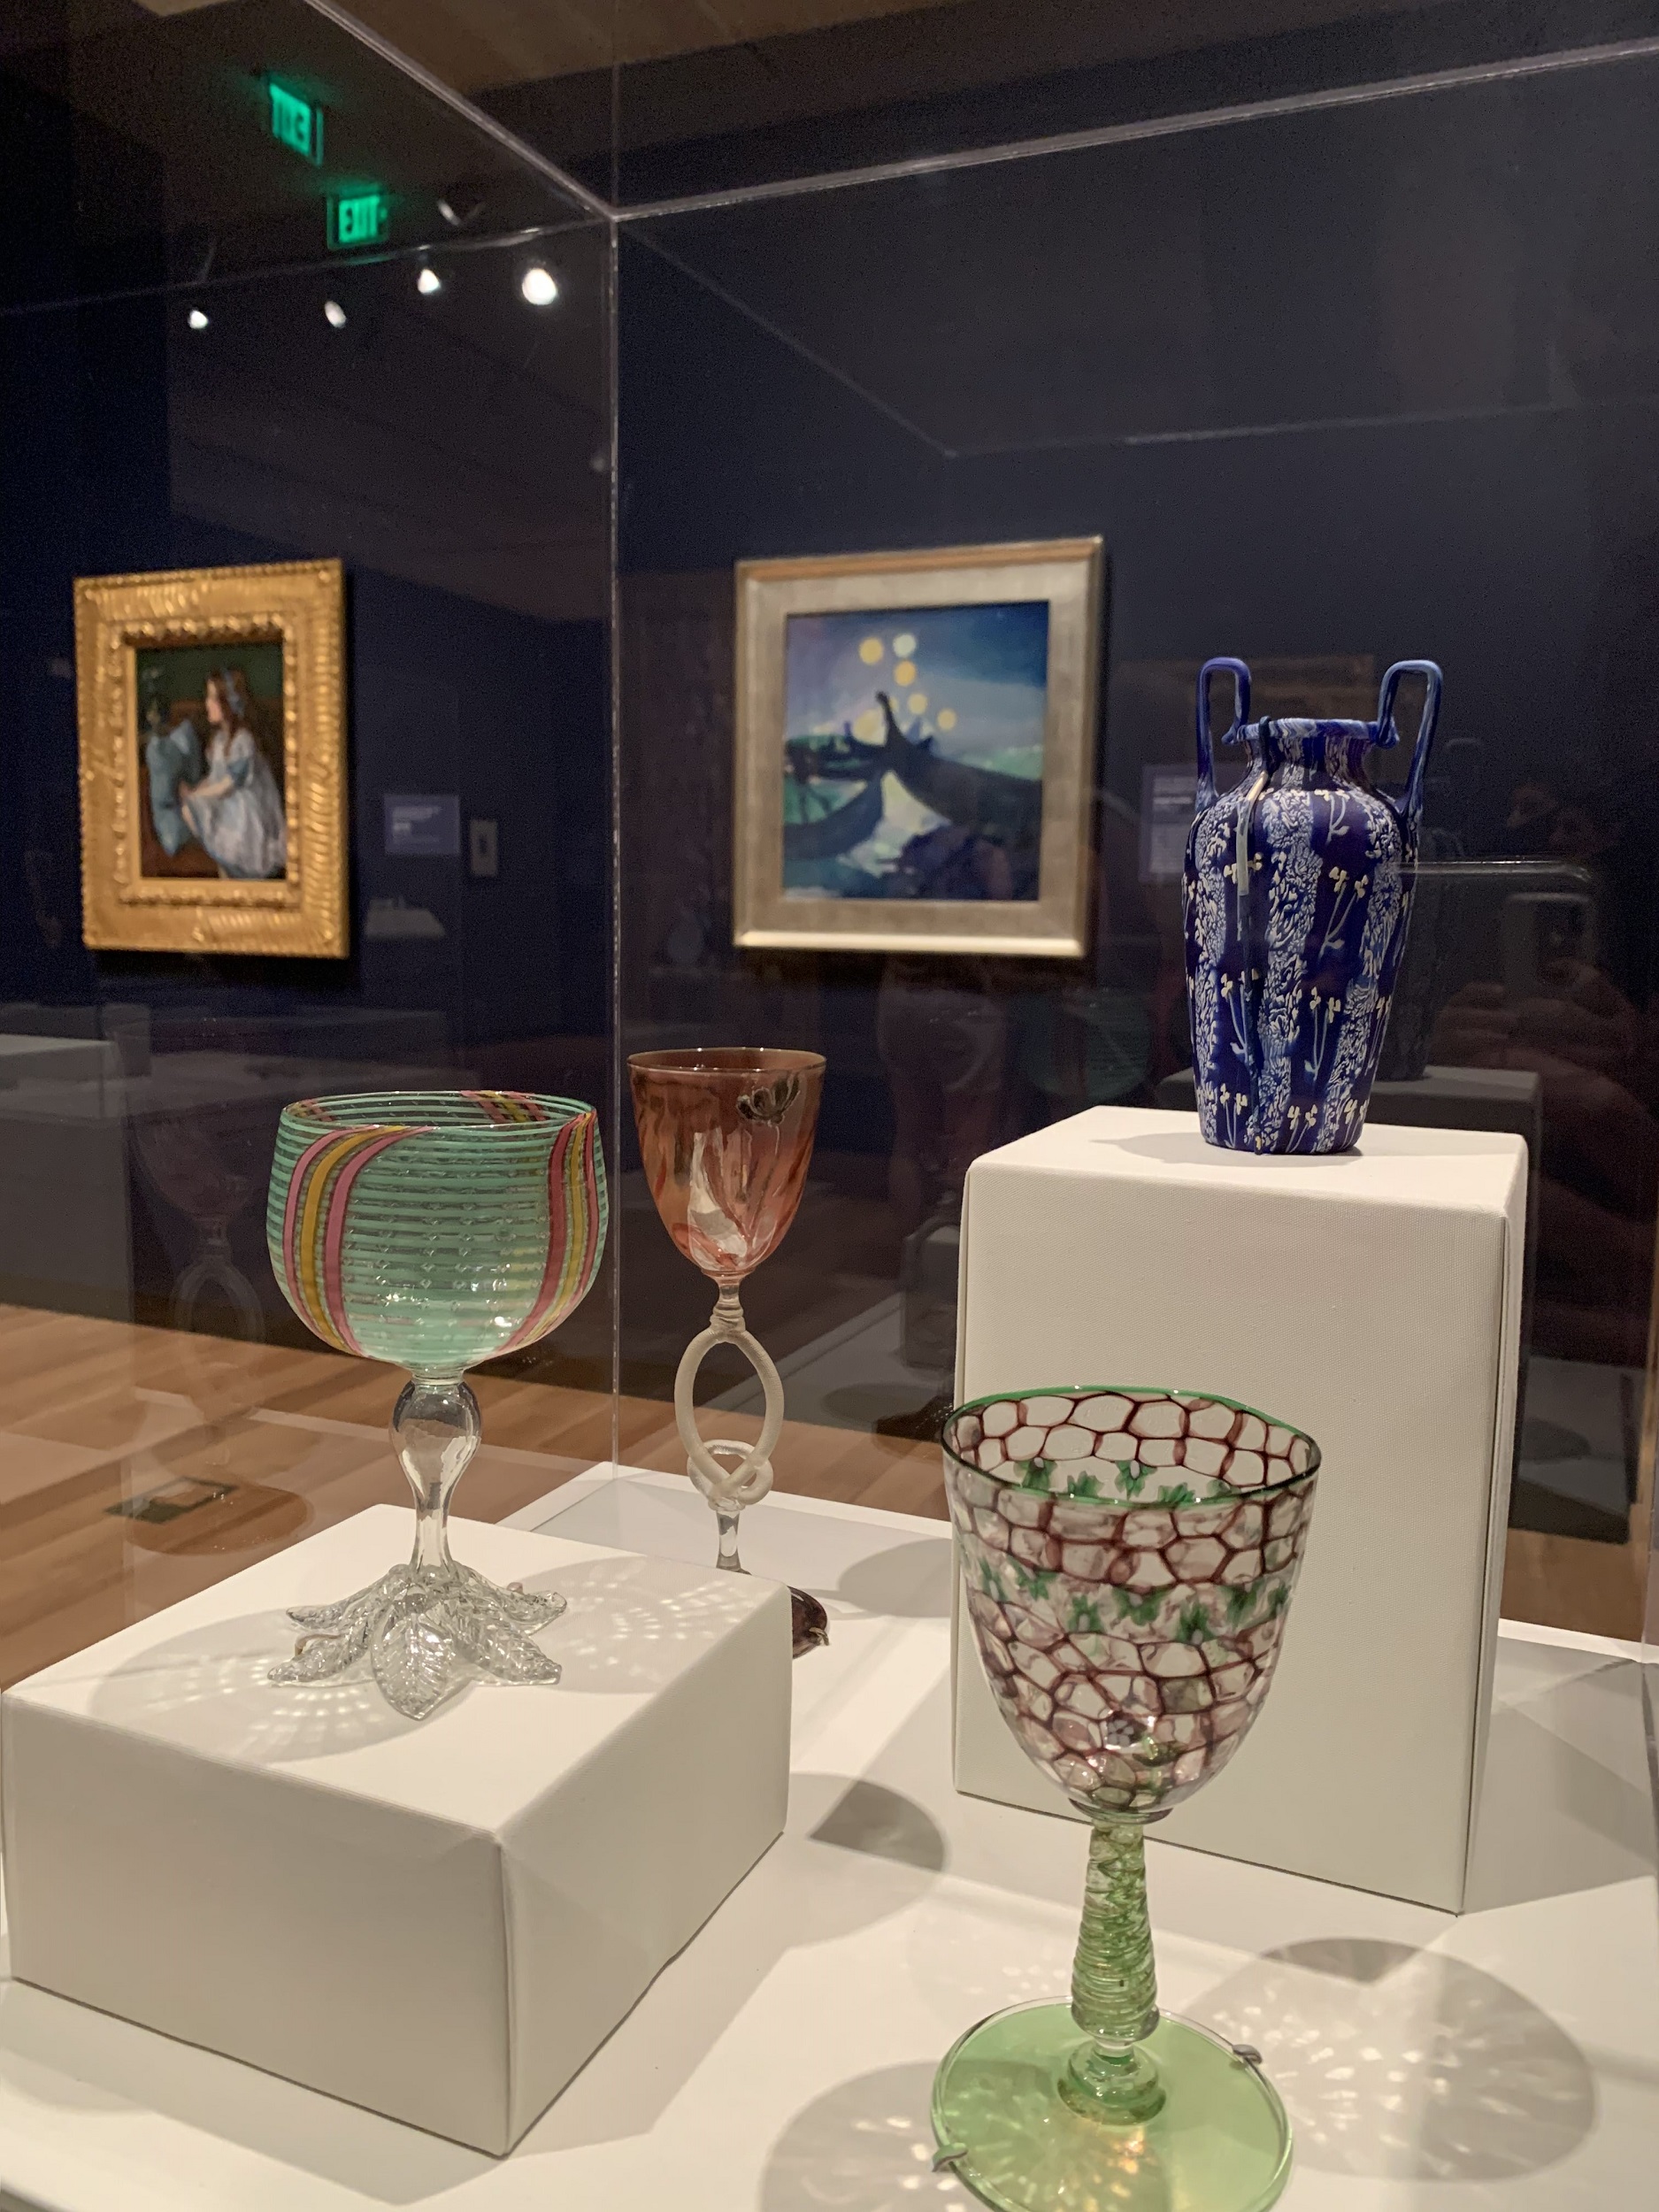 Interior view of a museum gallery, with a case containing several pieces of art glass in the foreground and paintings hung on a dark blue wall in the background.